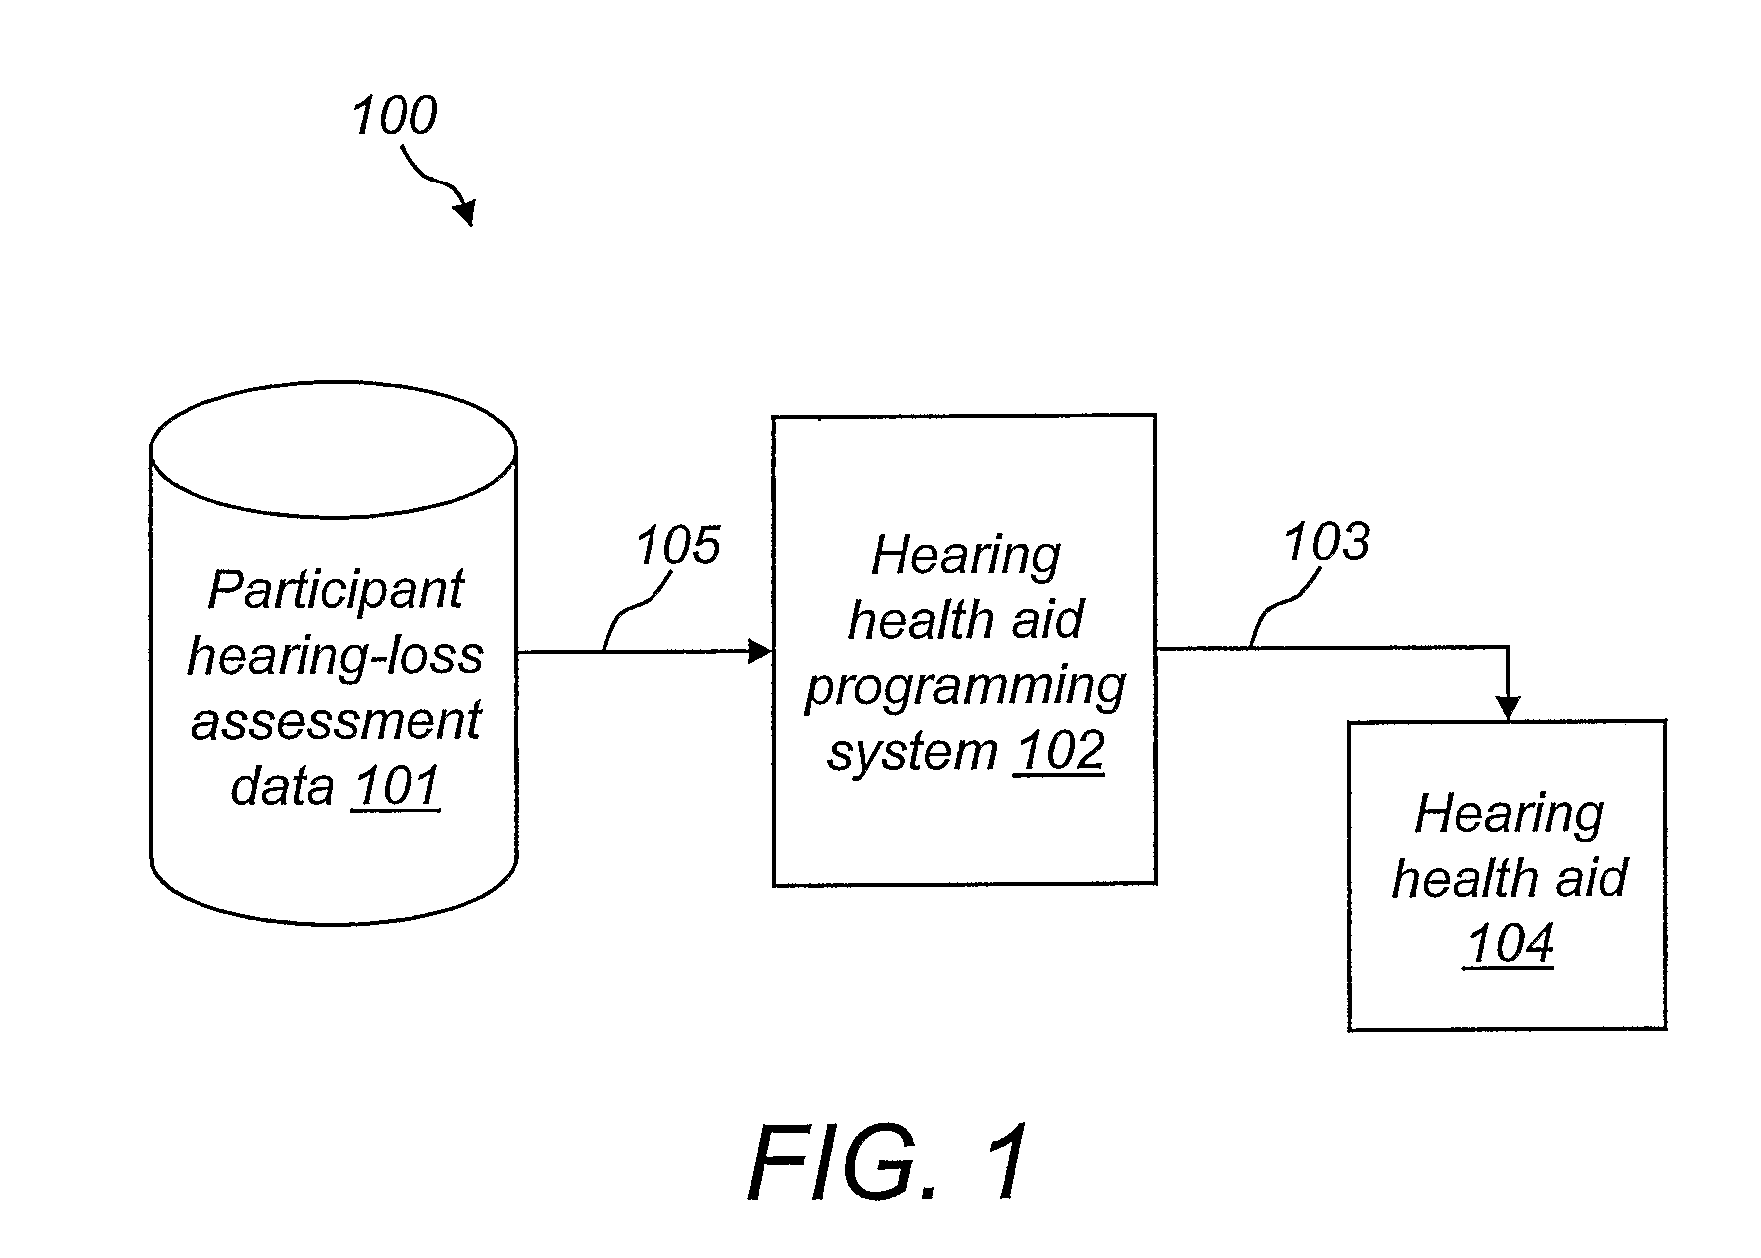 Low-Cost, Programmable, Time-Limited Hearing Health aid Apparatus, Method of Use, and System for Programming Same